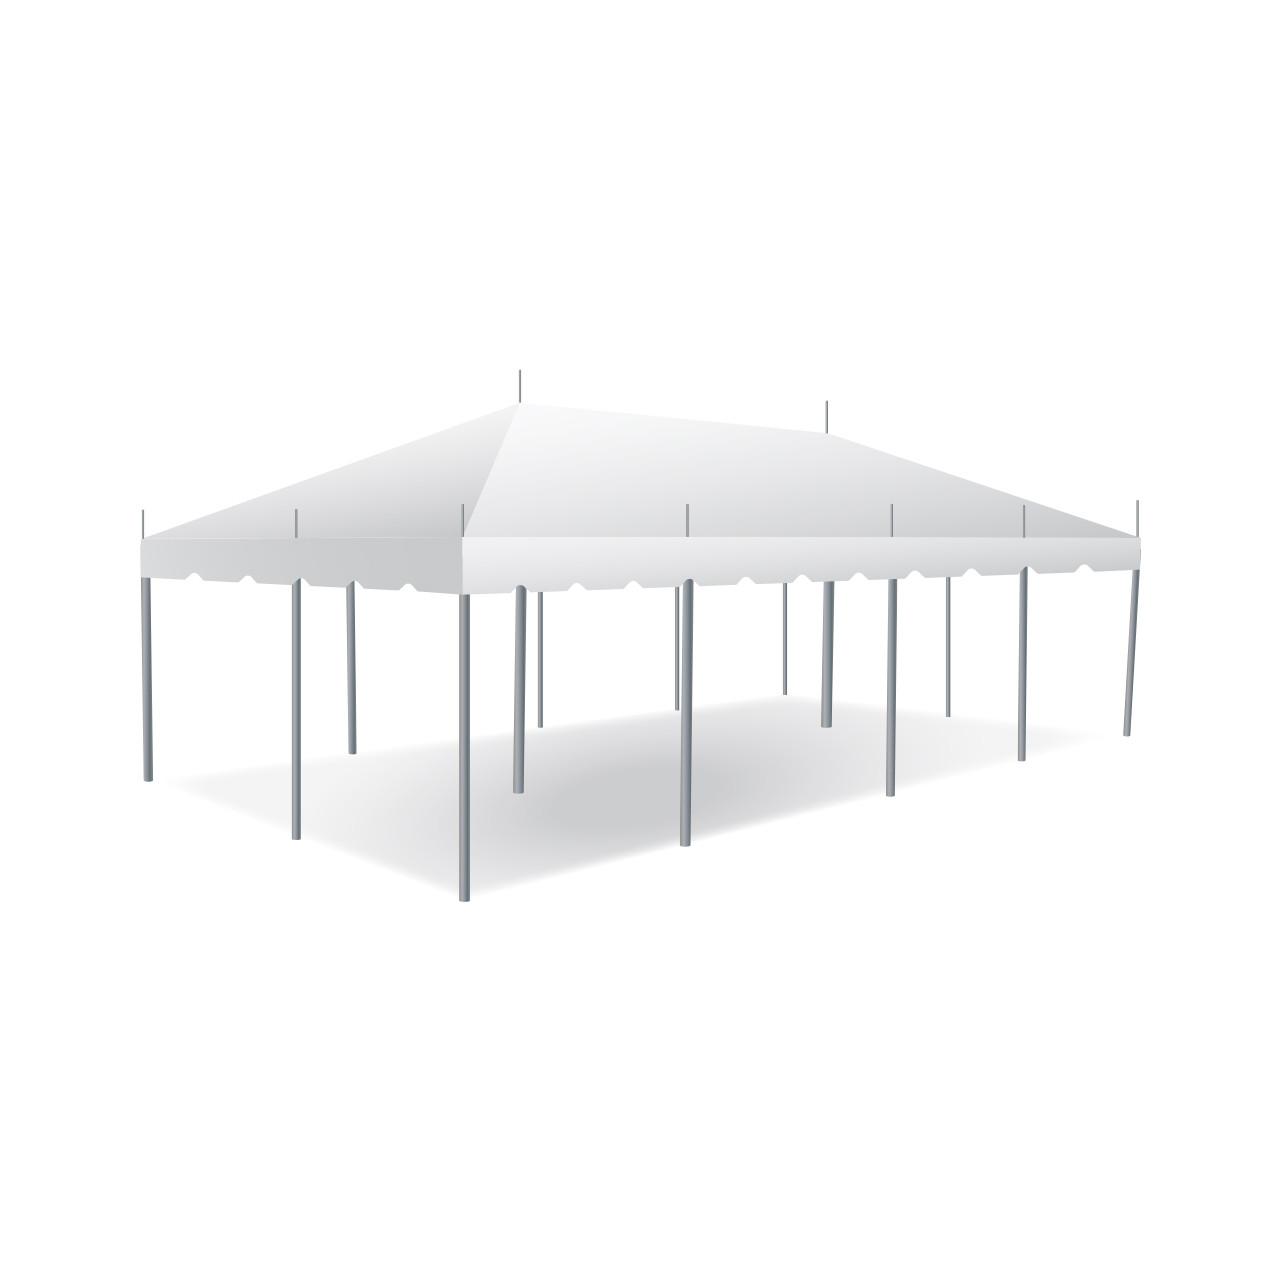 15' x 30' Classic Series Pole Tent, 1 Piece Tent Top, Complete